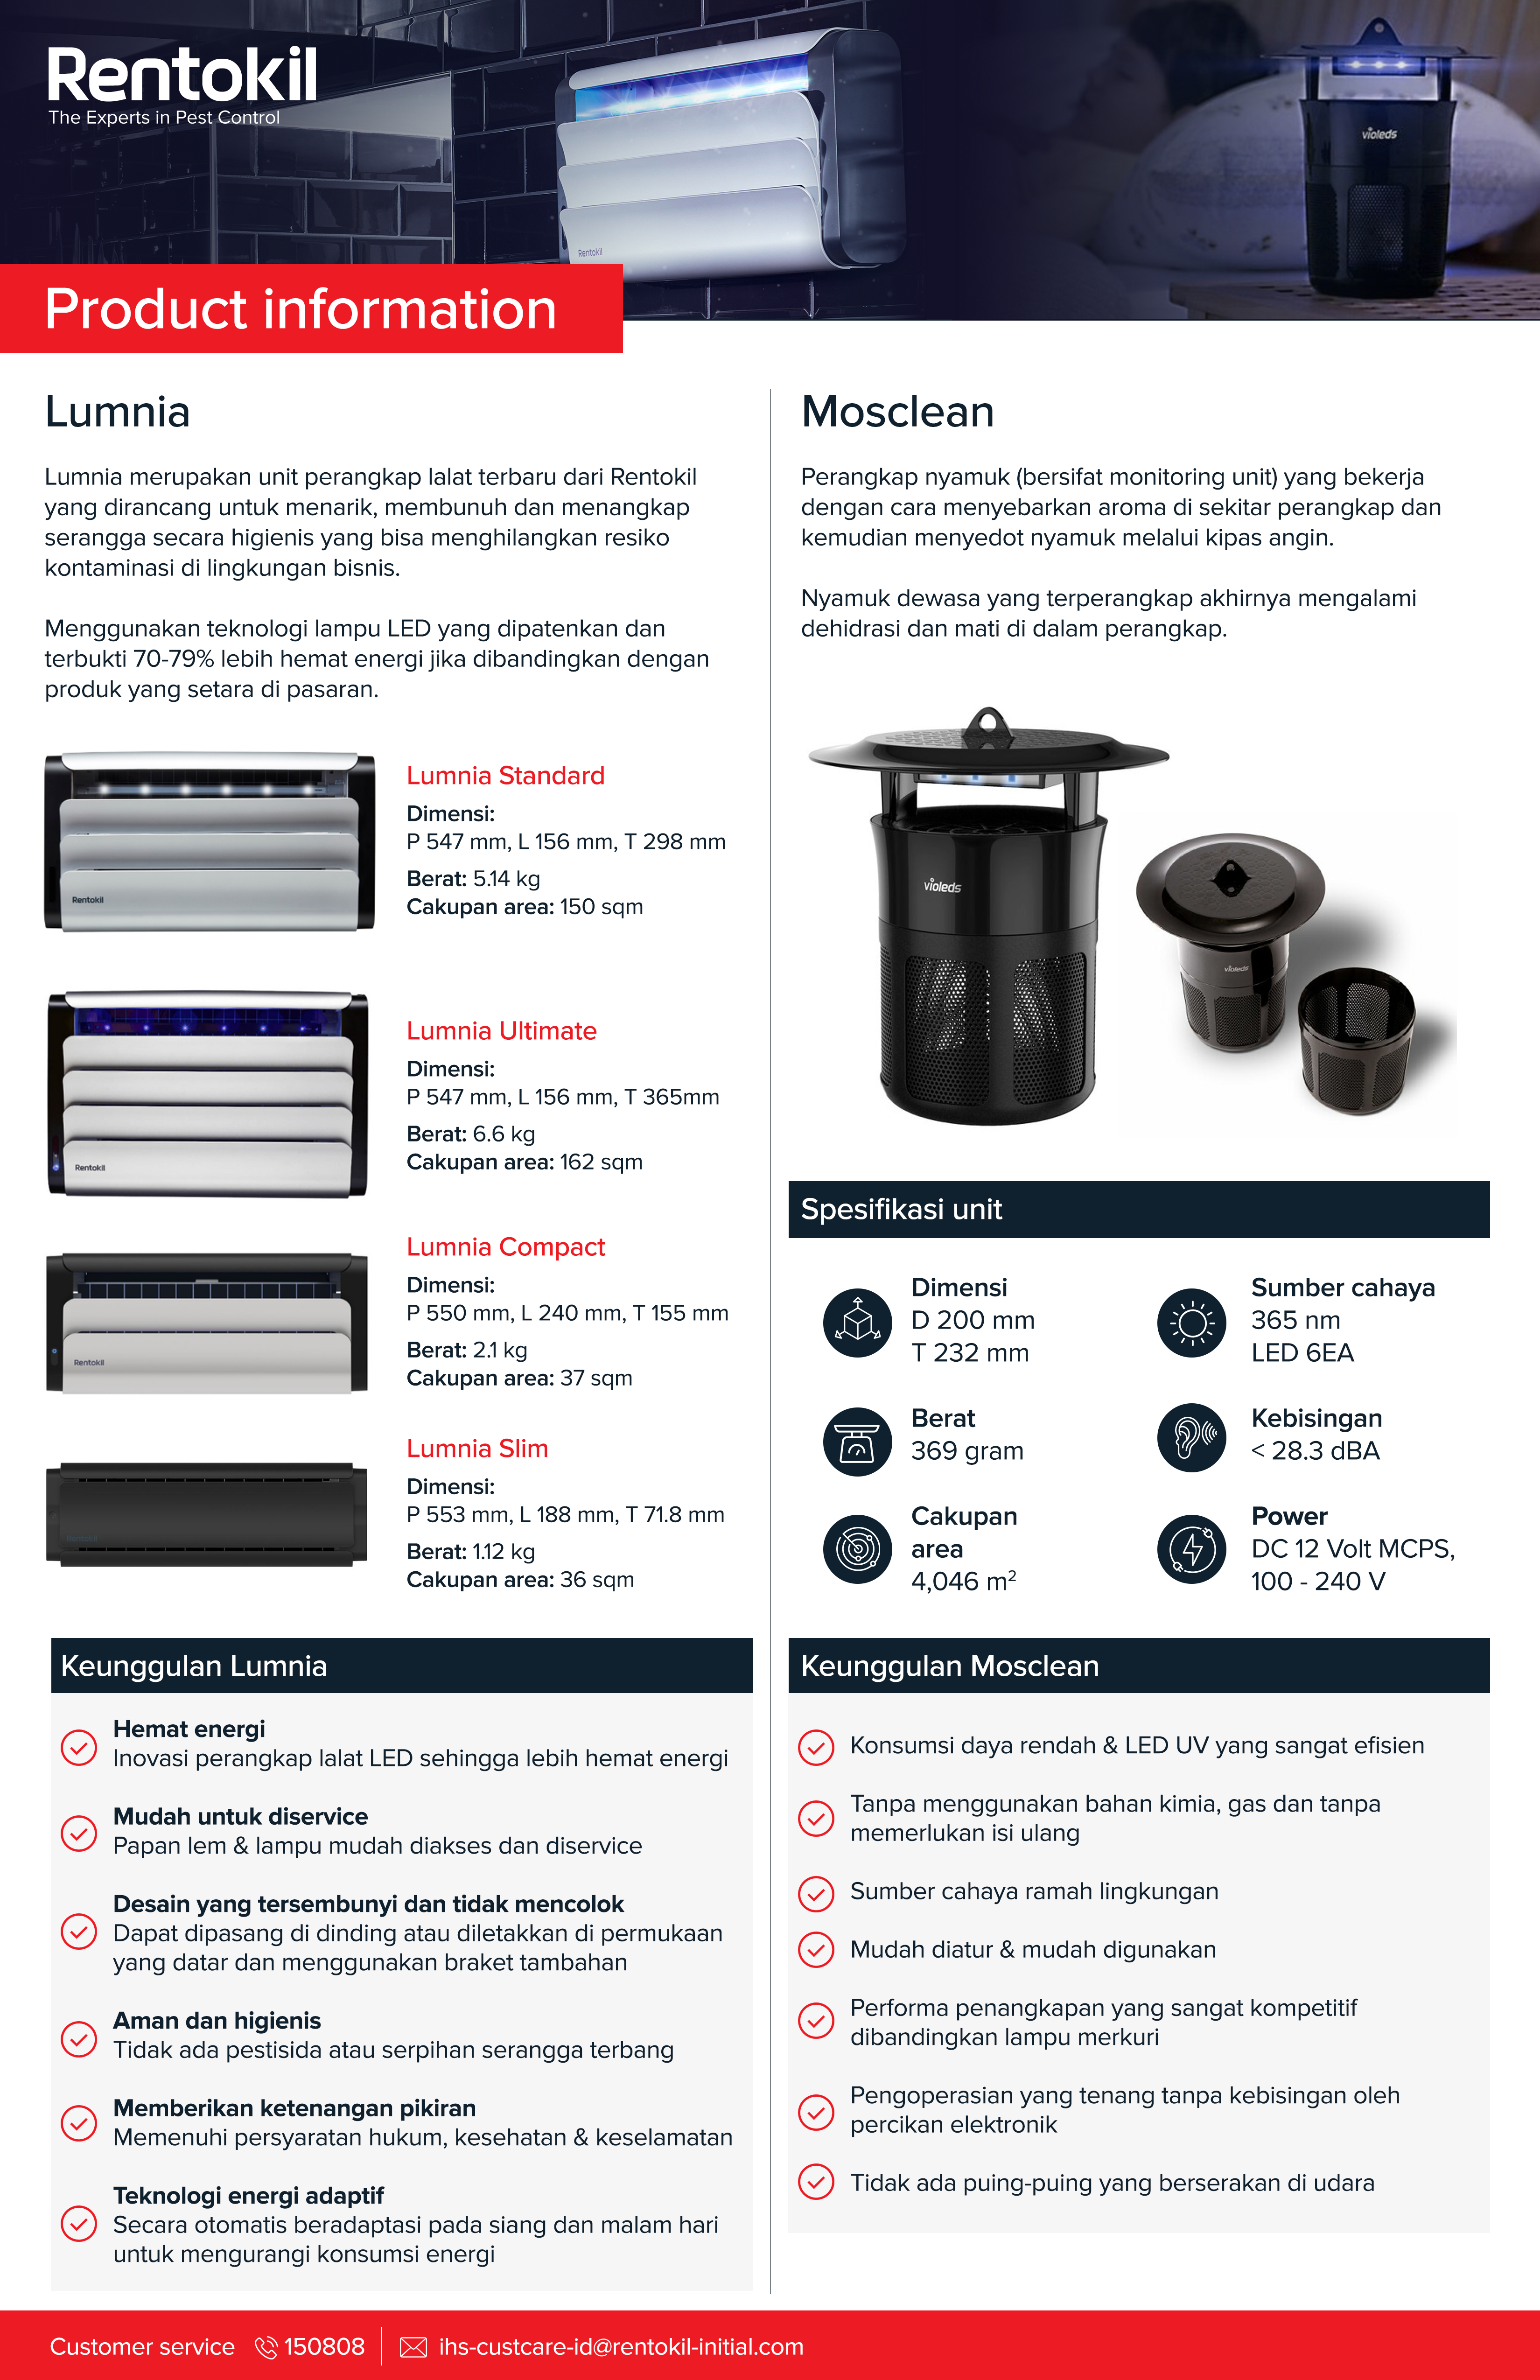 Copy of e-flyer-product-information_redesign-rev01.png